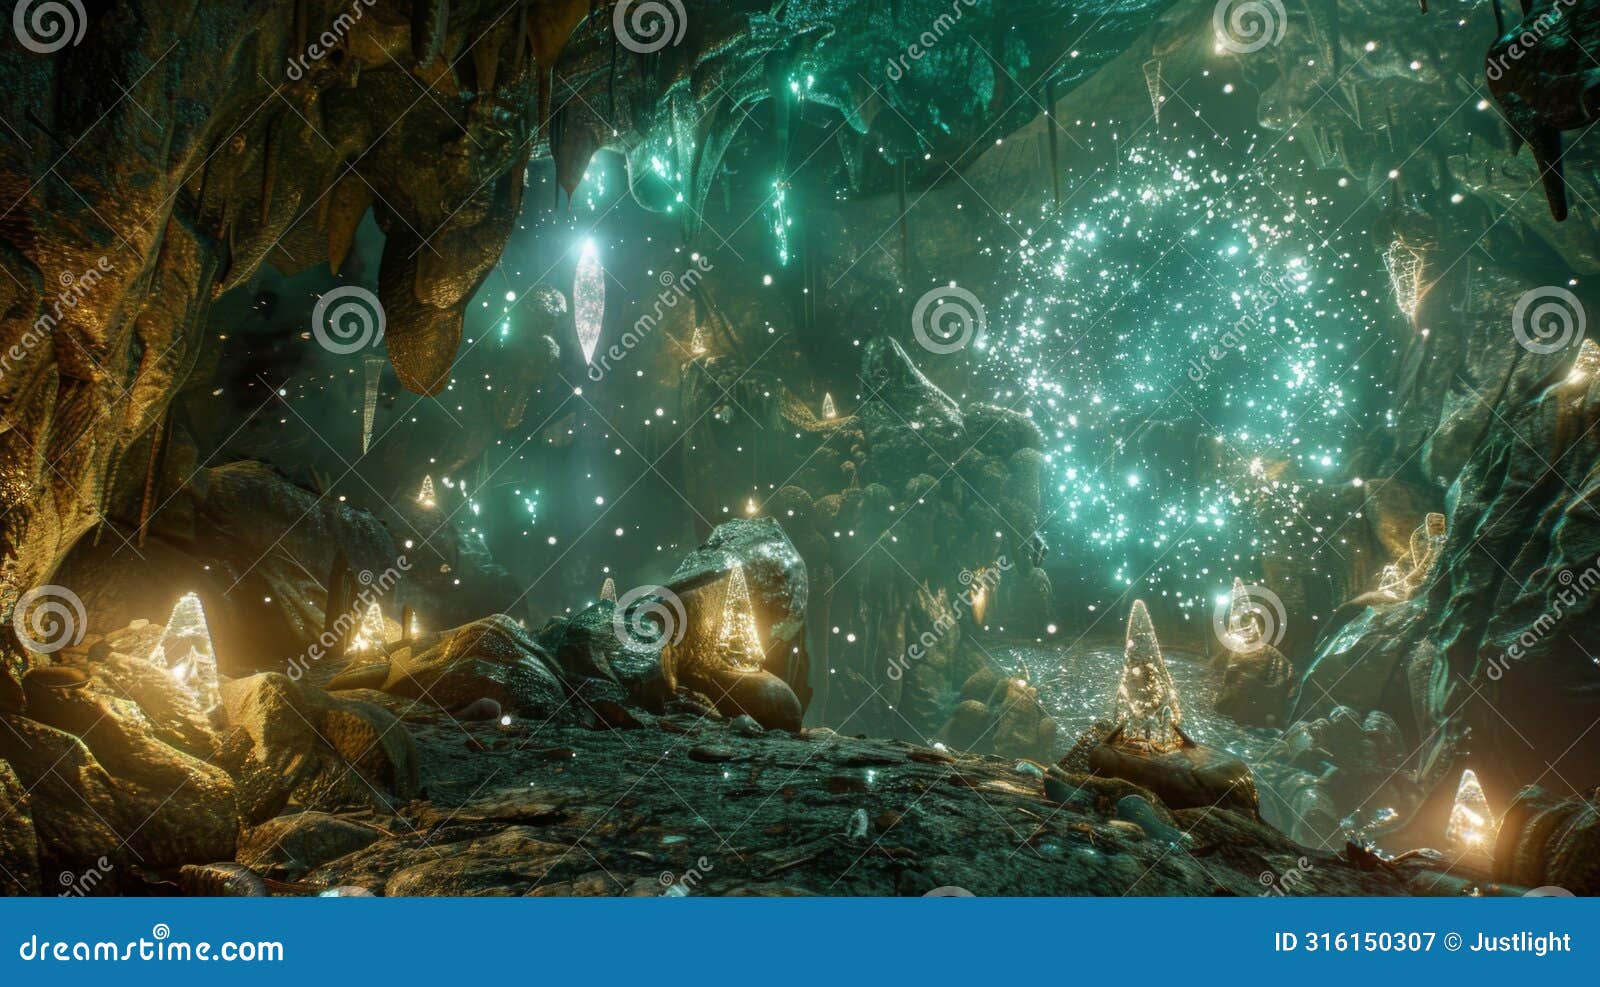 the walls of the remote cave are covered in intricate s and glowing crystals illuminating the mysterious enclave